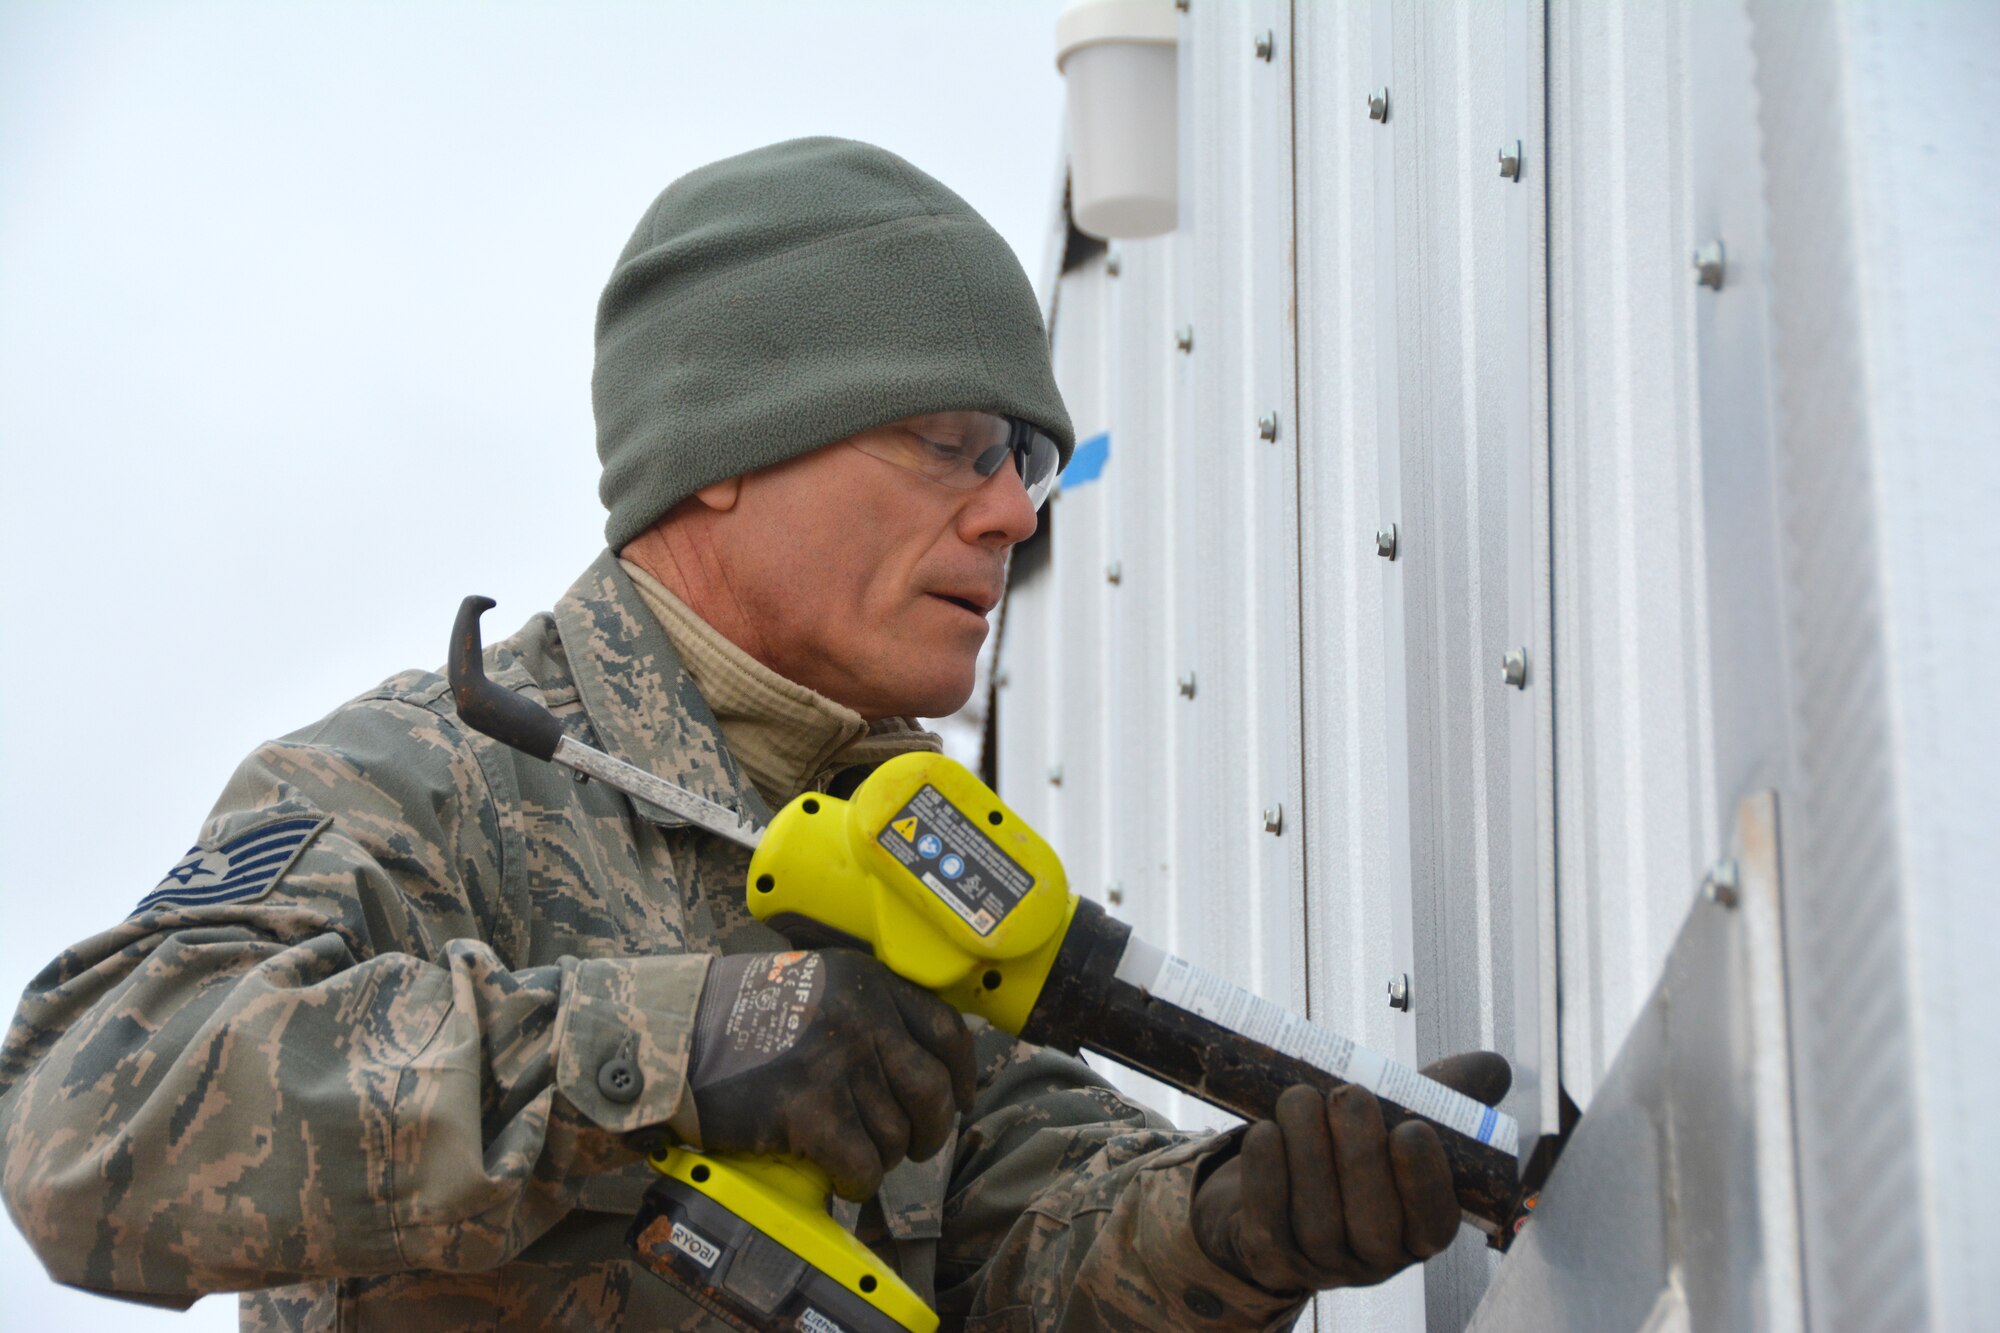 Tech. Sgt. Lyndon Jones, 507th Civil Engineer Squadron works on the final touches of one of the three new Quonset huts at the Glenwood training area here February 26. Reserve Citizen Airmen partnered with the 72nd Air Base Wing to build the huts and repair some damaged facilities at the training area. The new Quonset huts are more permanent, cheaper, and fully equipped with electric, heating and air. The improvements will make readiness training exercises on the site more efficient, according to members of the wing inspection team. (U.S. Air Force Photo by Maj. Jon Quinlan)